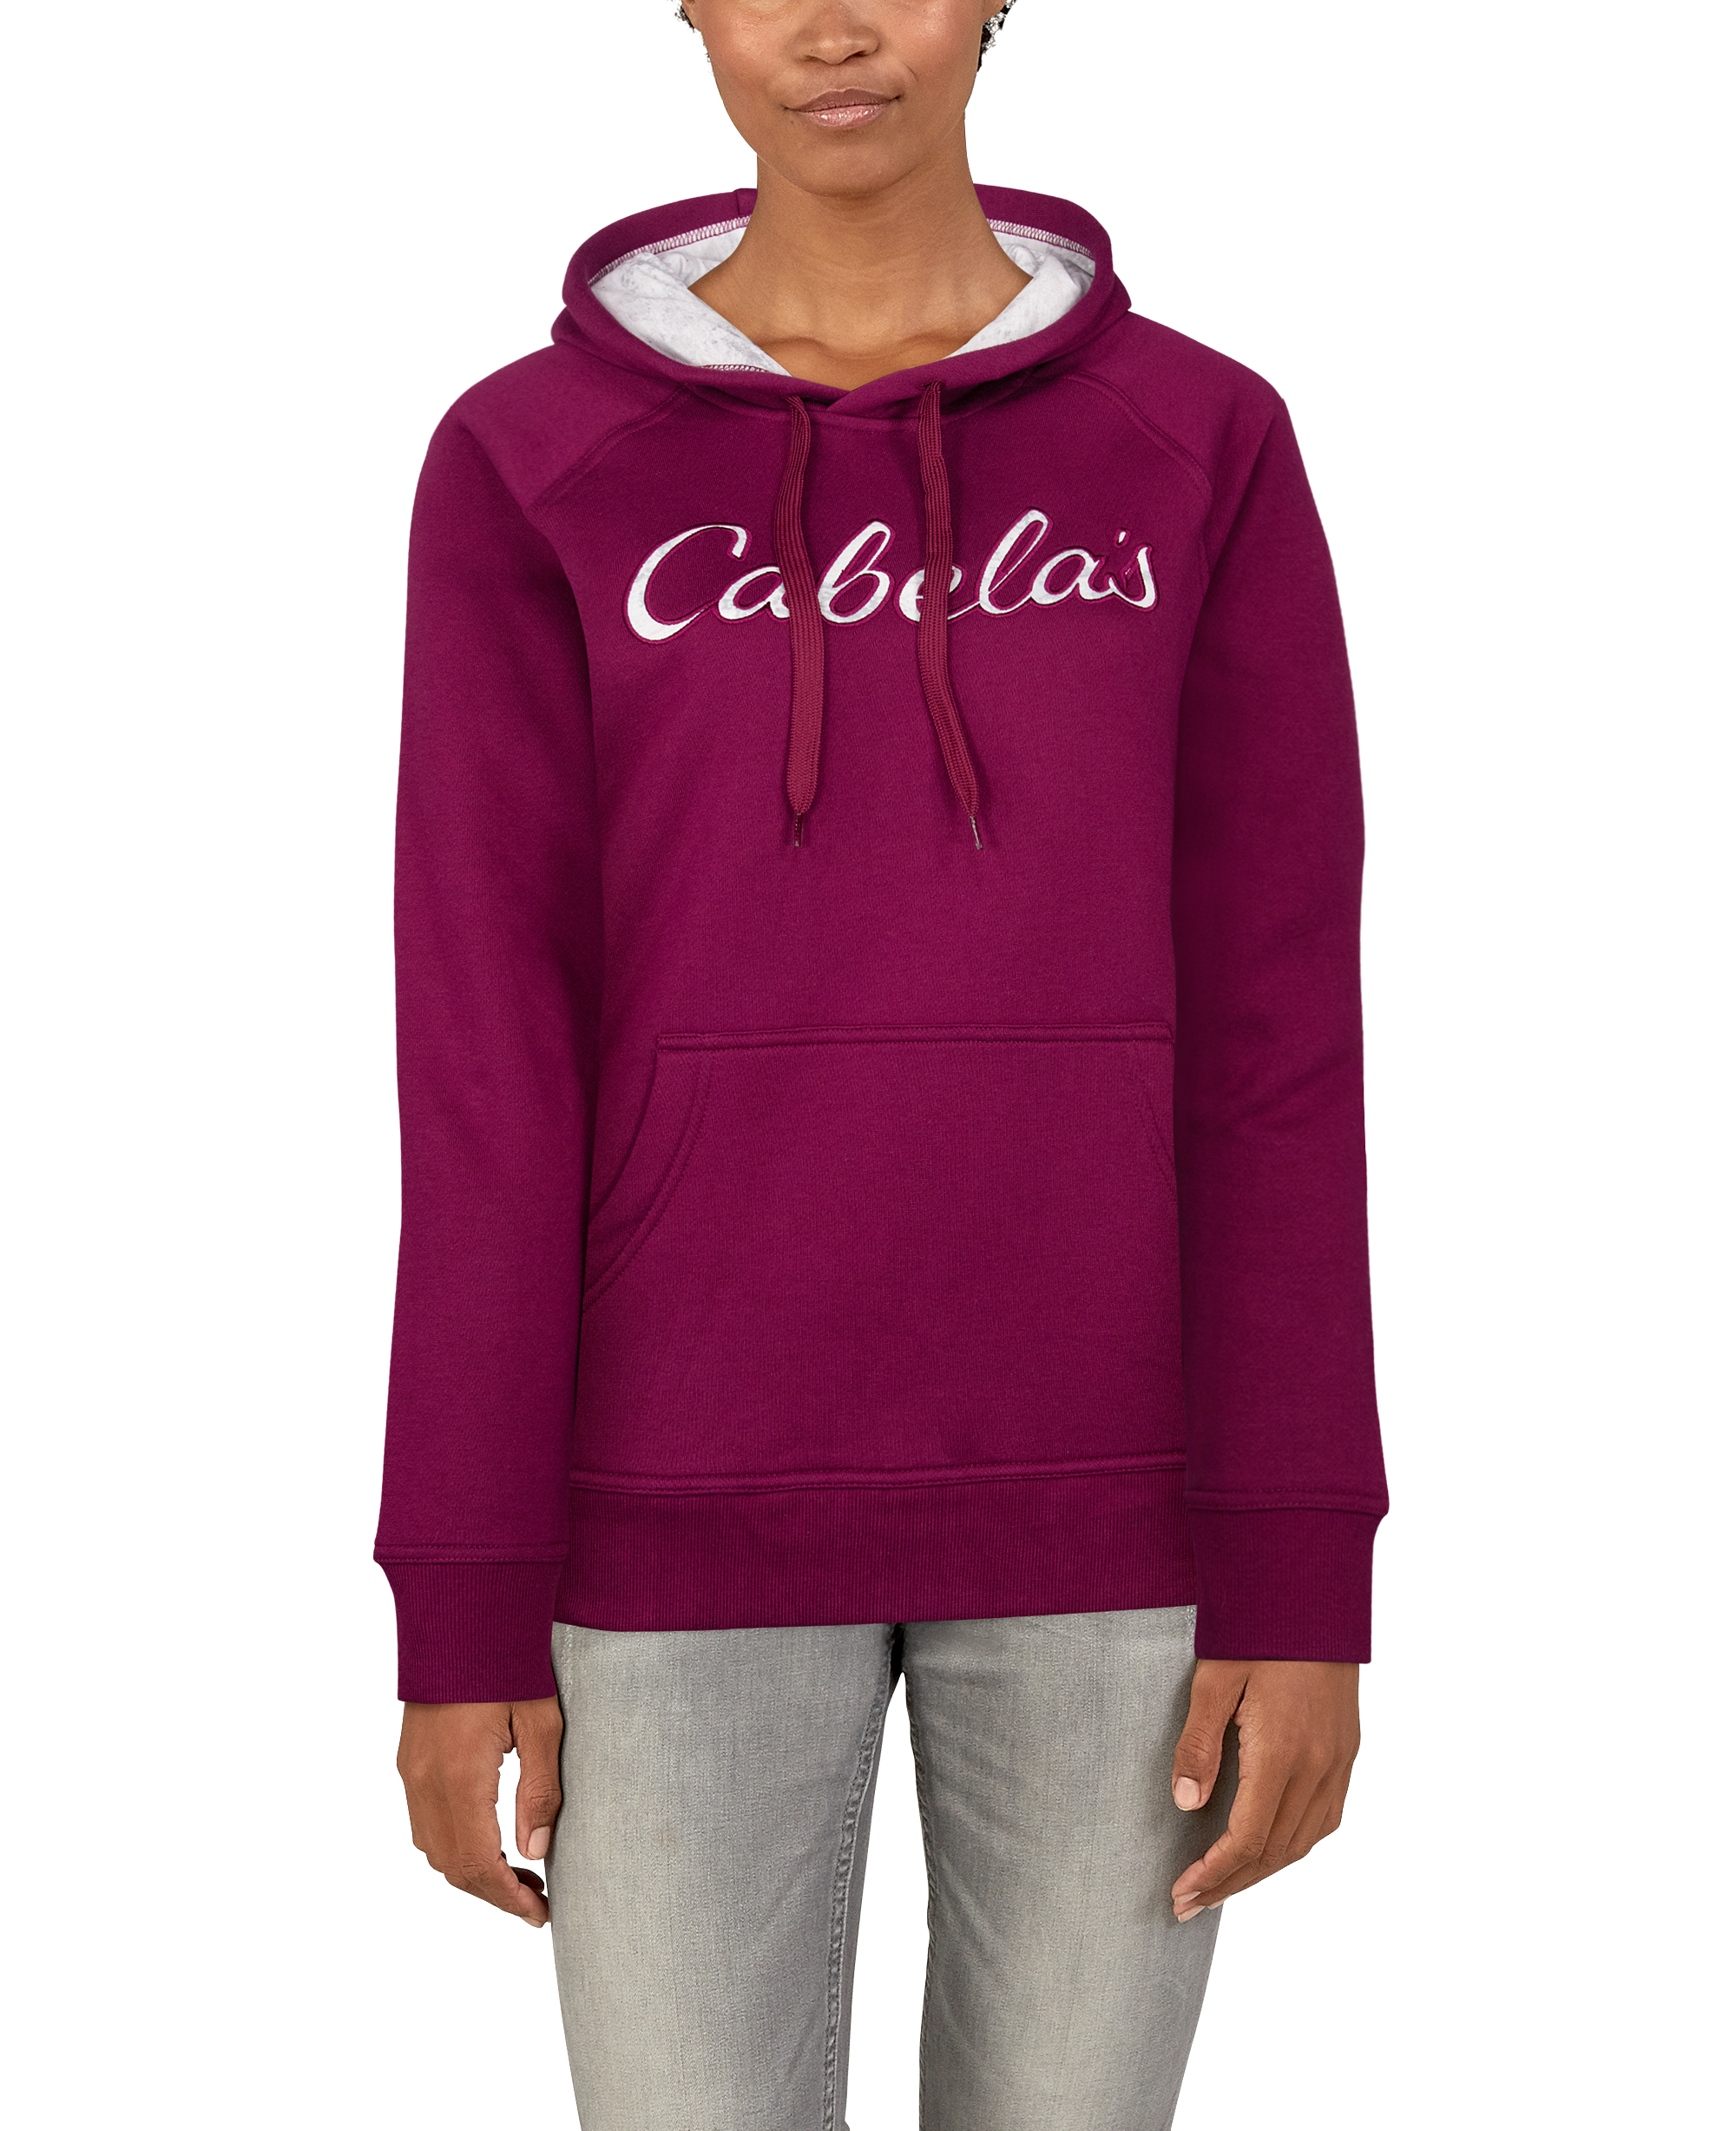 Cabela's Gameday Camo Lettering Long-Sleeve Hoodie for Ladies - Heather Grey - 2XL